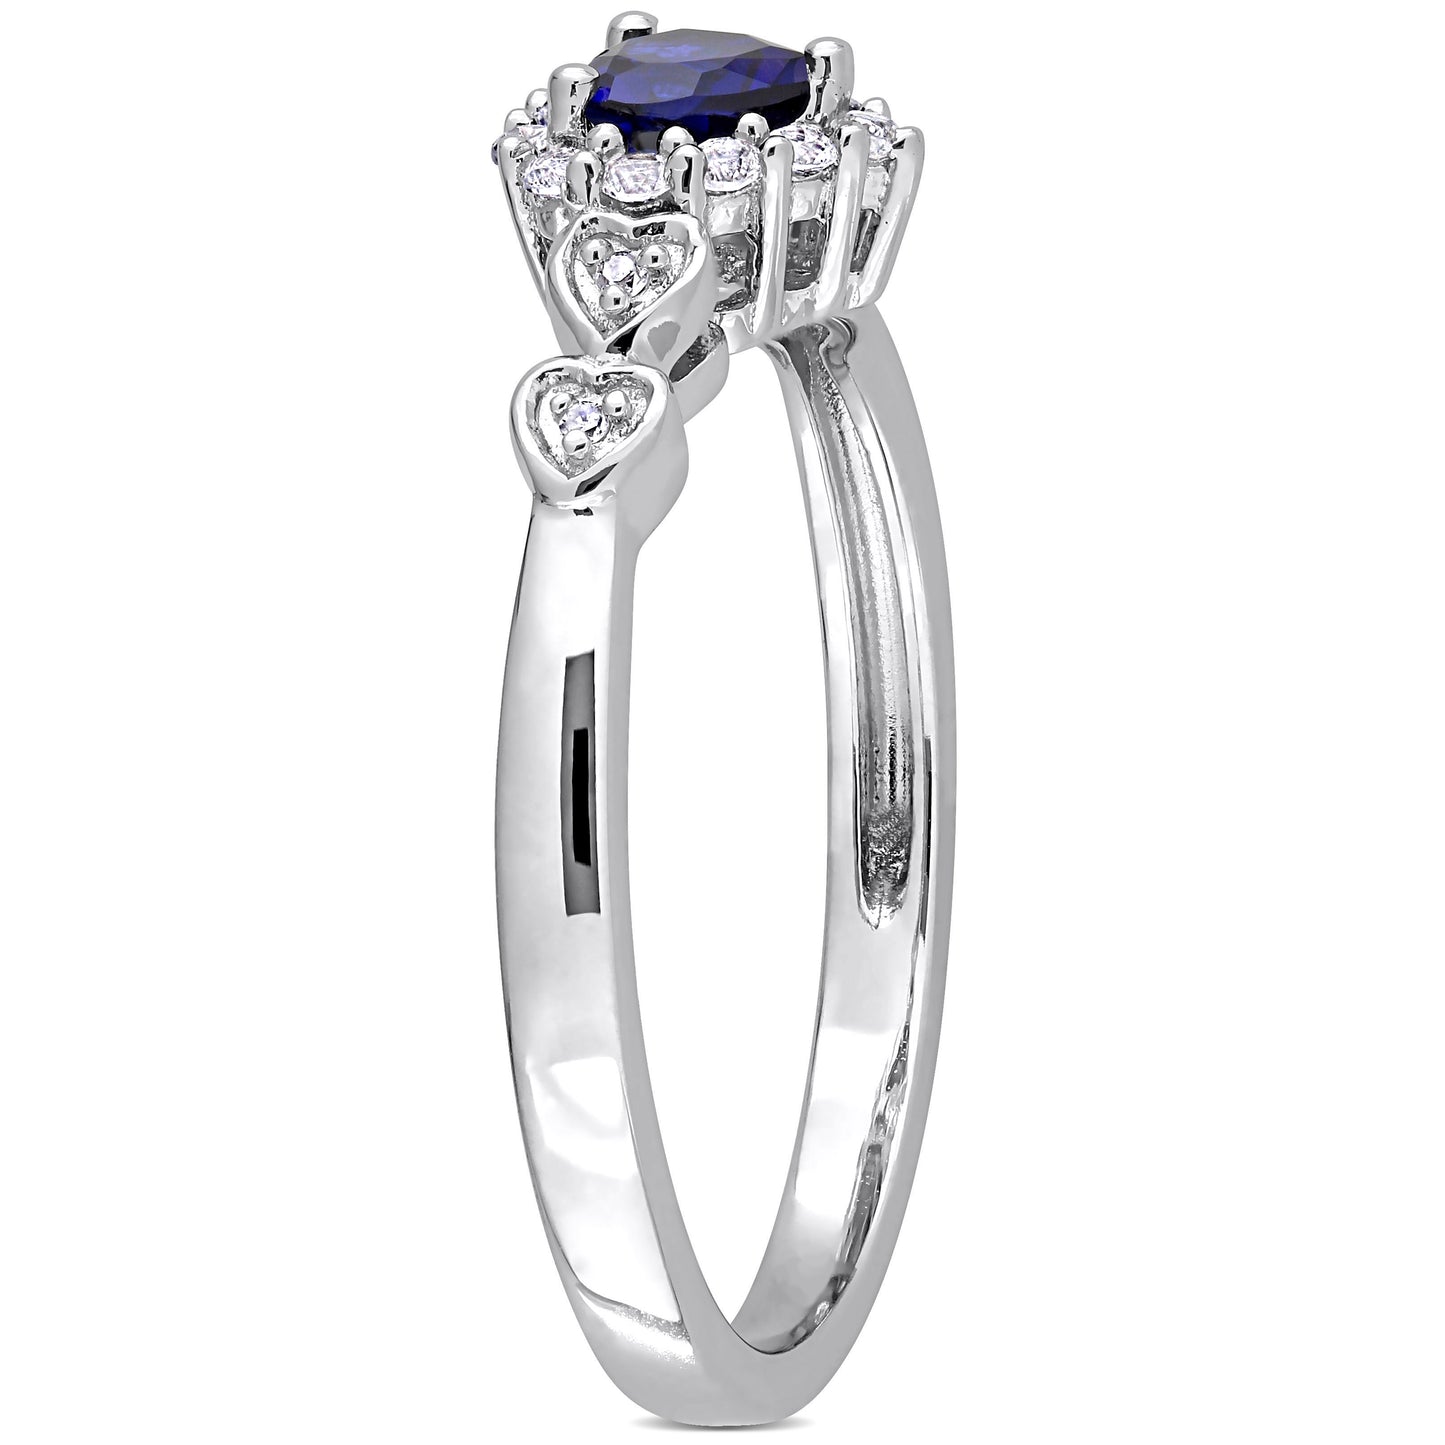 Heart Blue & White Sapphire and Diamond Ring in Sterling Silver